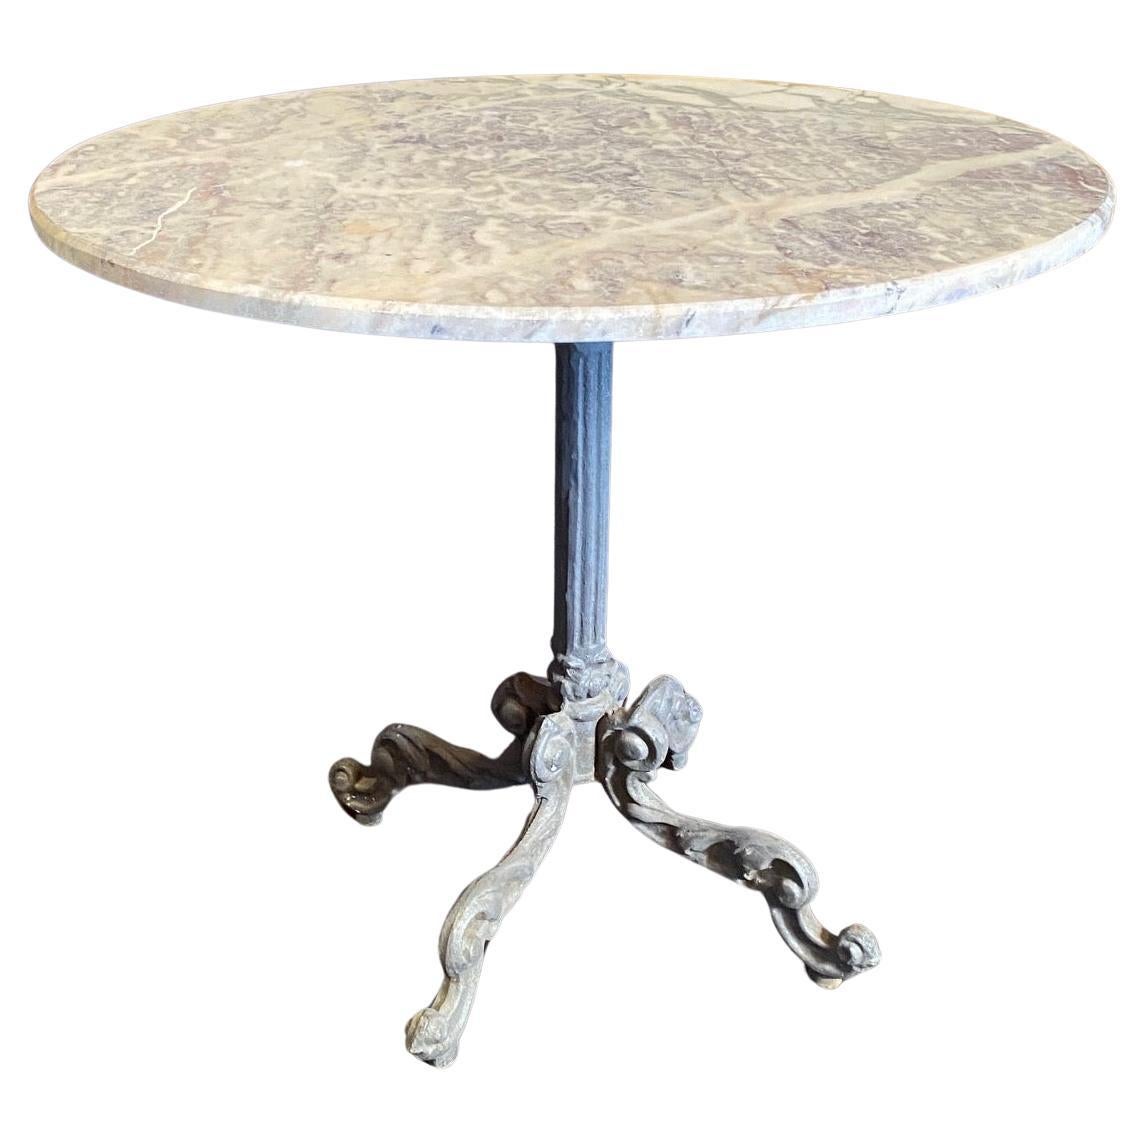 French Round Marble Top Cafe Bistro Table with Wonderful Metal Base